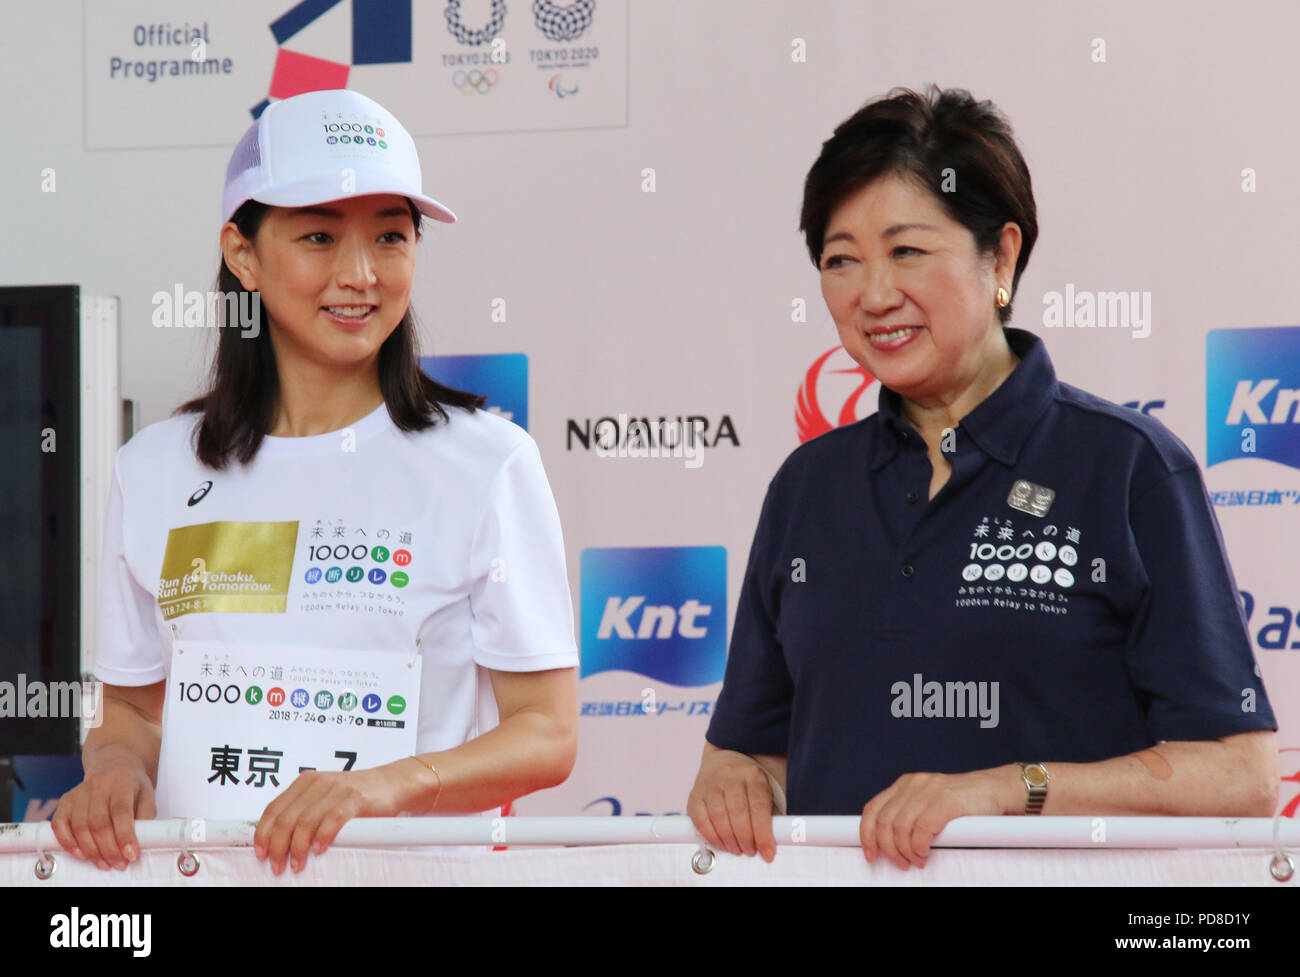 Tokyo, Japan. 7th Aug, 2018. Barcelona Olympics swimming gold medalist Kyoko Iwasaki (L) chats with after she finished the '1,000km relay to Tokyo' at the Komazawa stadium in Tokyo on Tuesday, August 7, 2018. Some 1,600 runners participated the marathon relay from Aomori to Tokyo for the commemoration of the 3.11 East Japan Great Earthquake. Credit: Yoshio Tsunoda/AFLO/Alamy Live News Stock Photo